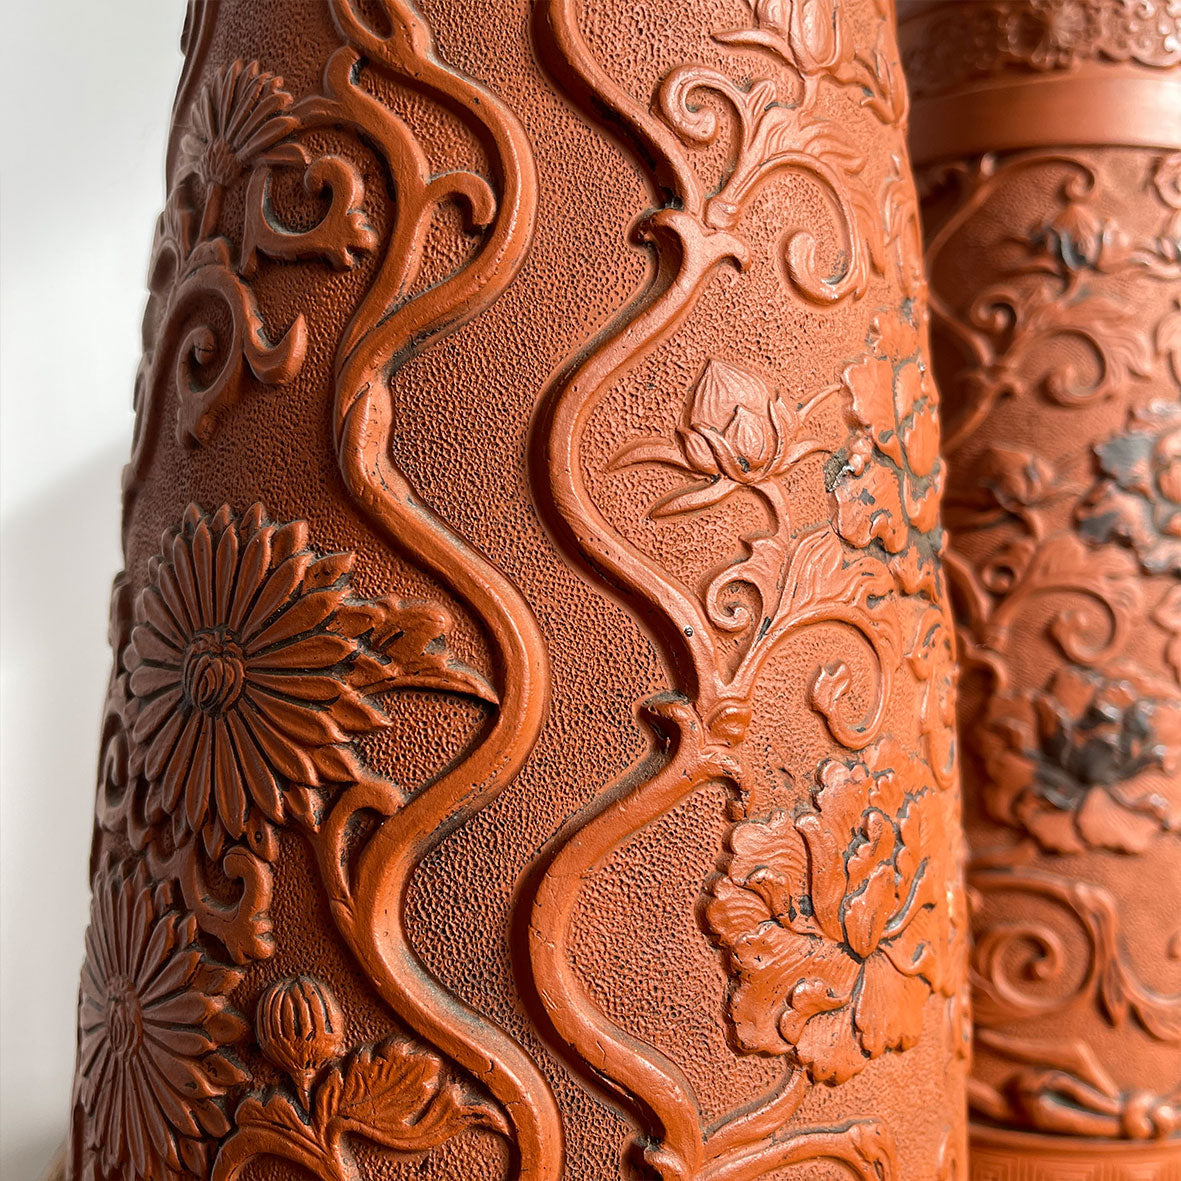 A stunning pair of large Japanese Tokoname Terracotta Vase with a beautiful deep decoration of chrysanthemums and vines. Dating from the late 19th C. Both marked on their bases. No chips, just perfect! - SHOP NOW - www.intovintage.co.uk